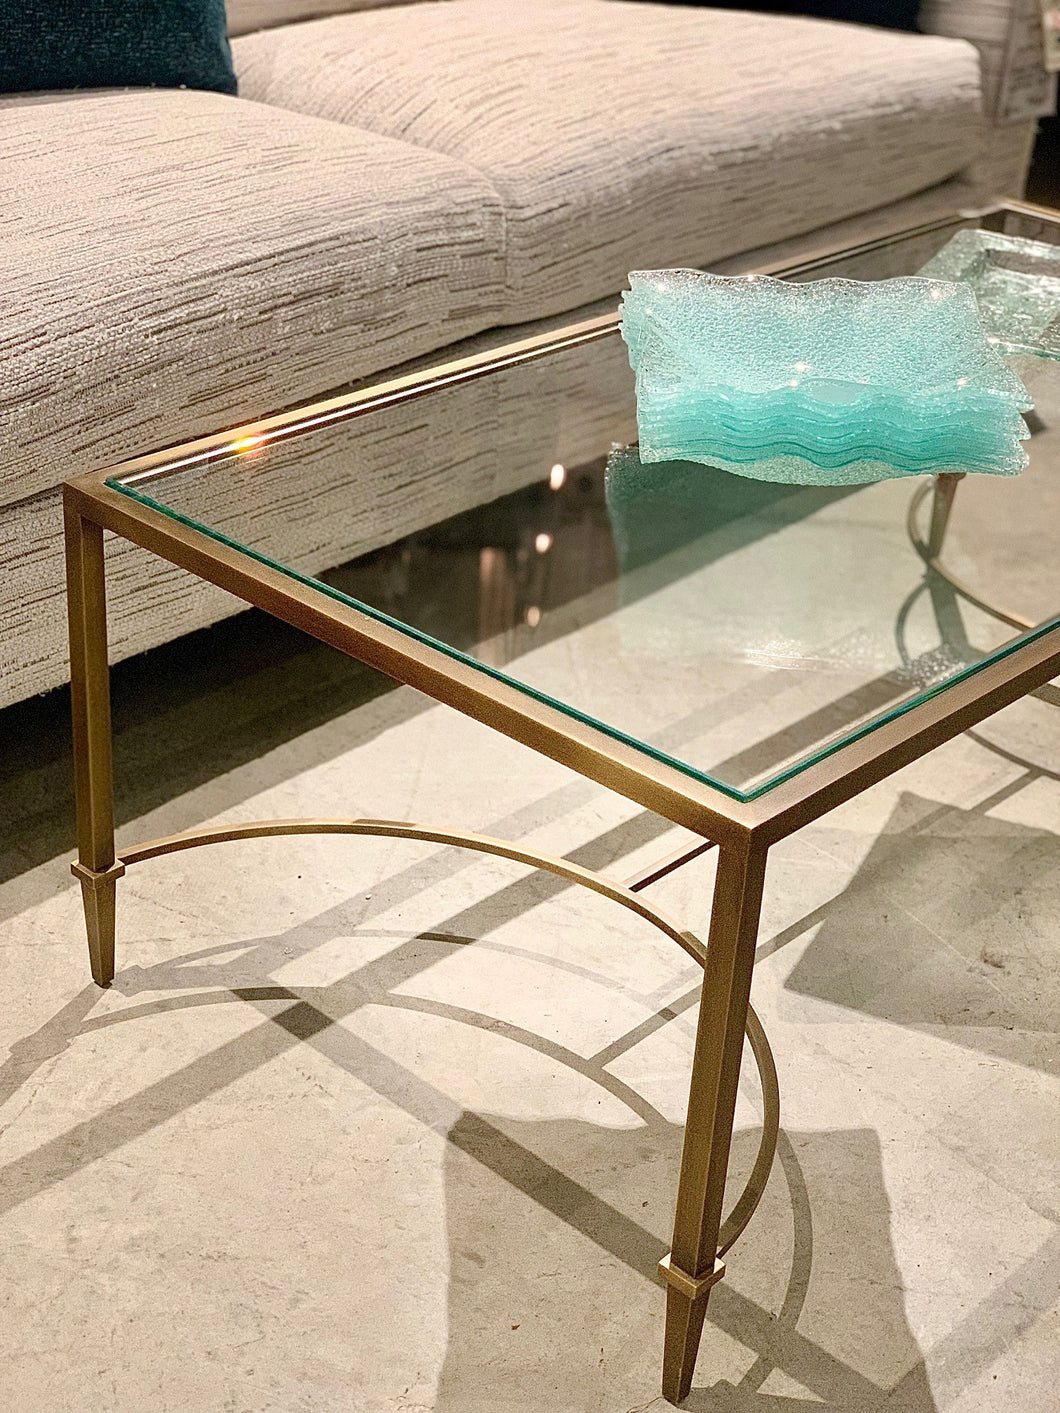 Luxury brushed brass and glass coffee table, Baker Furniture